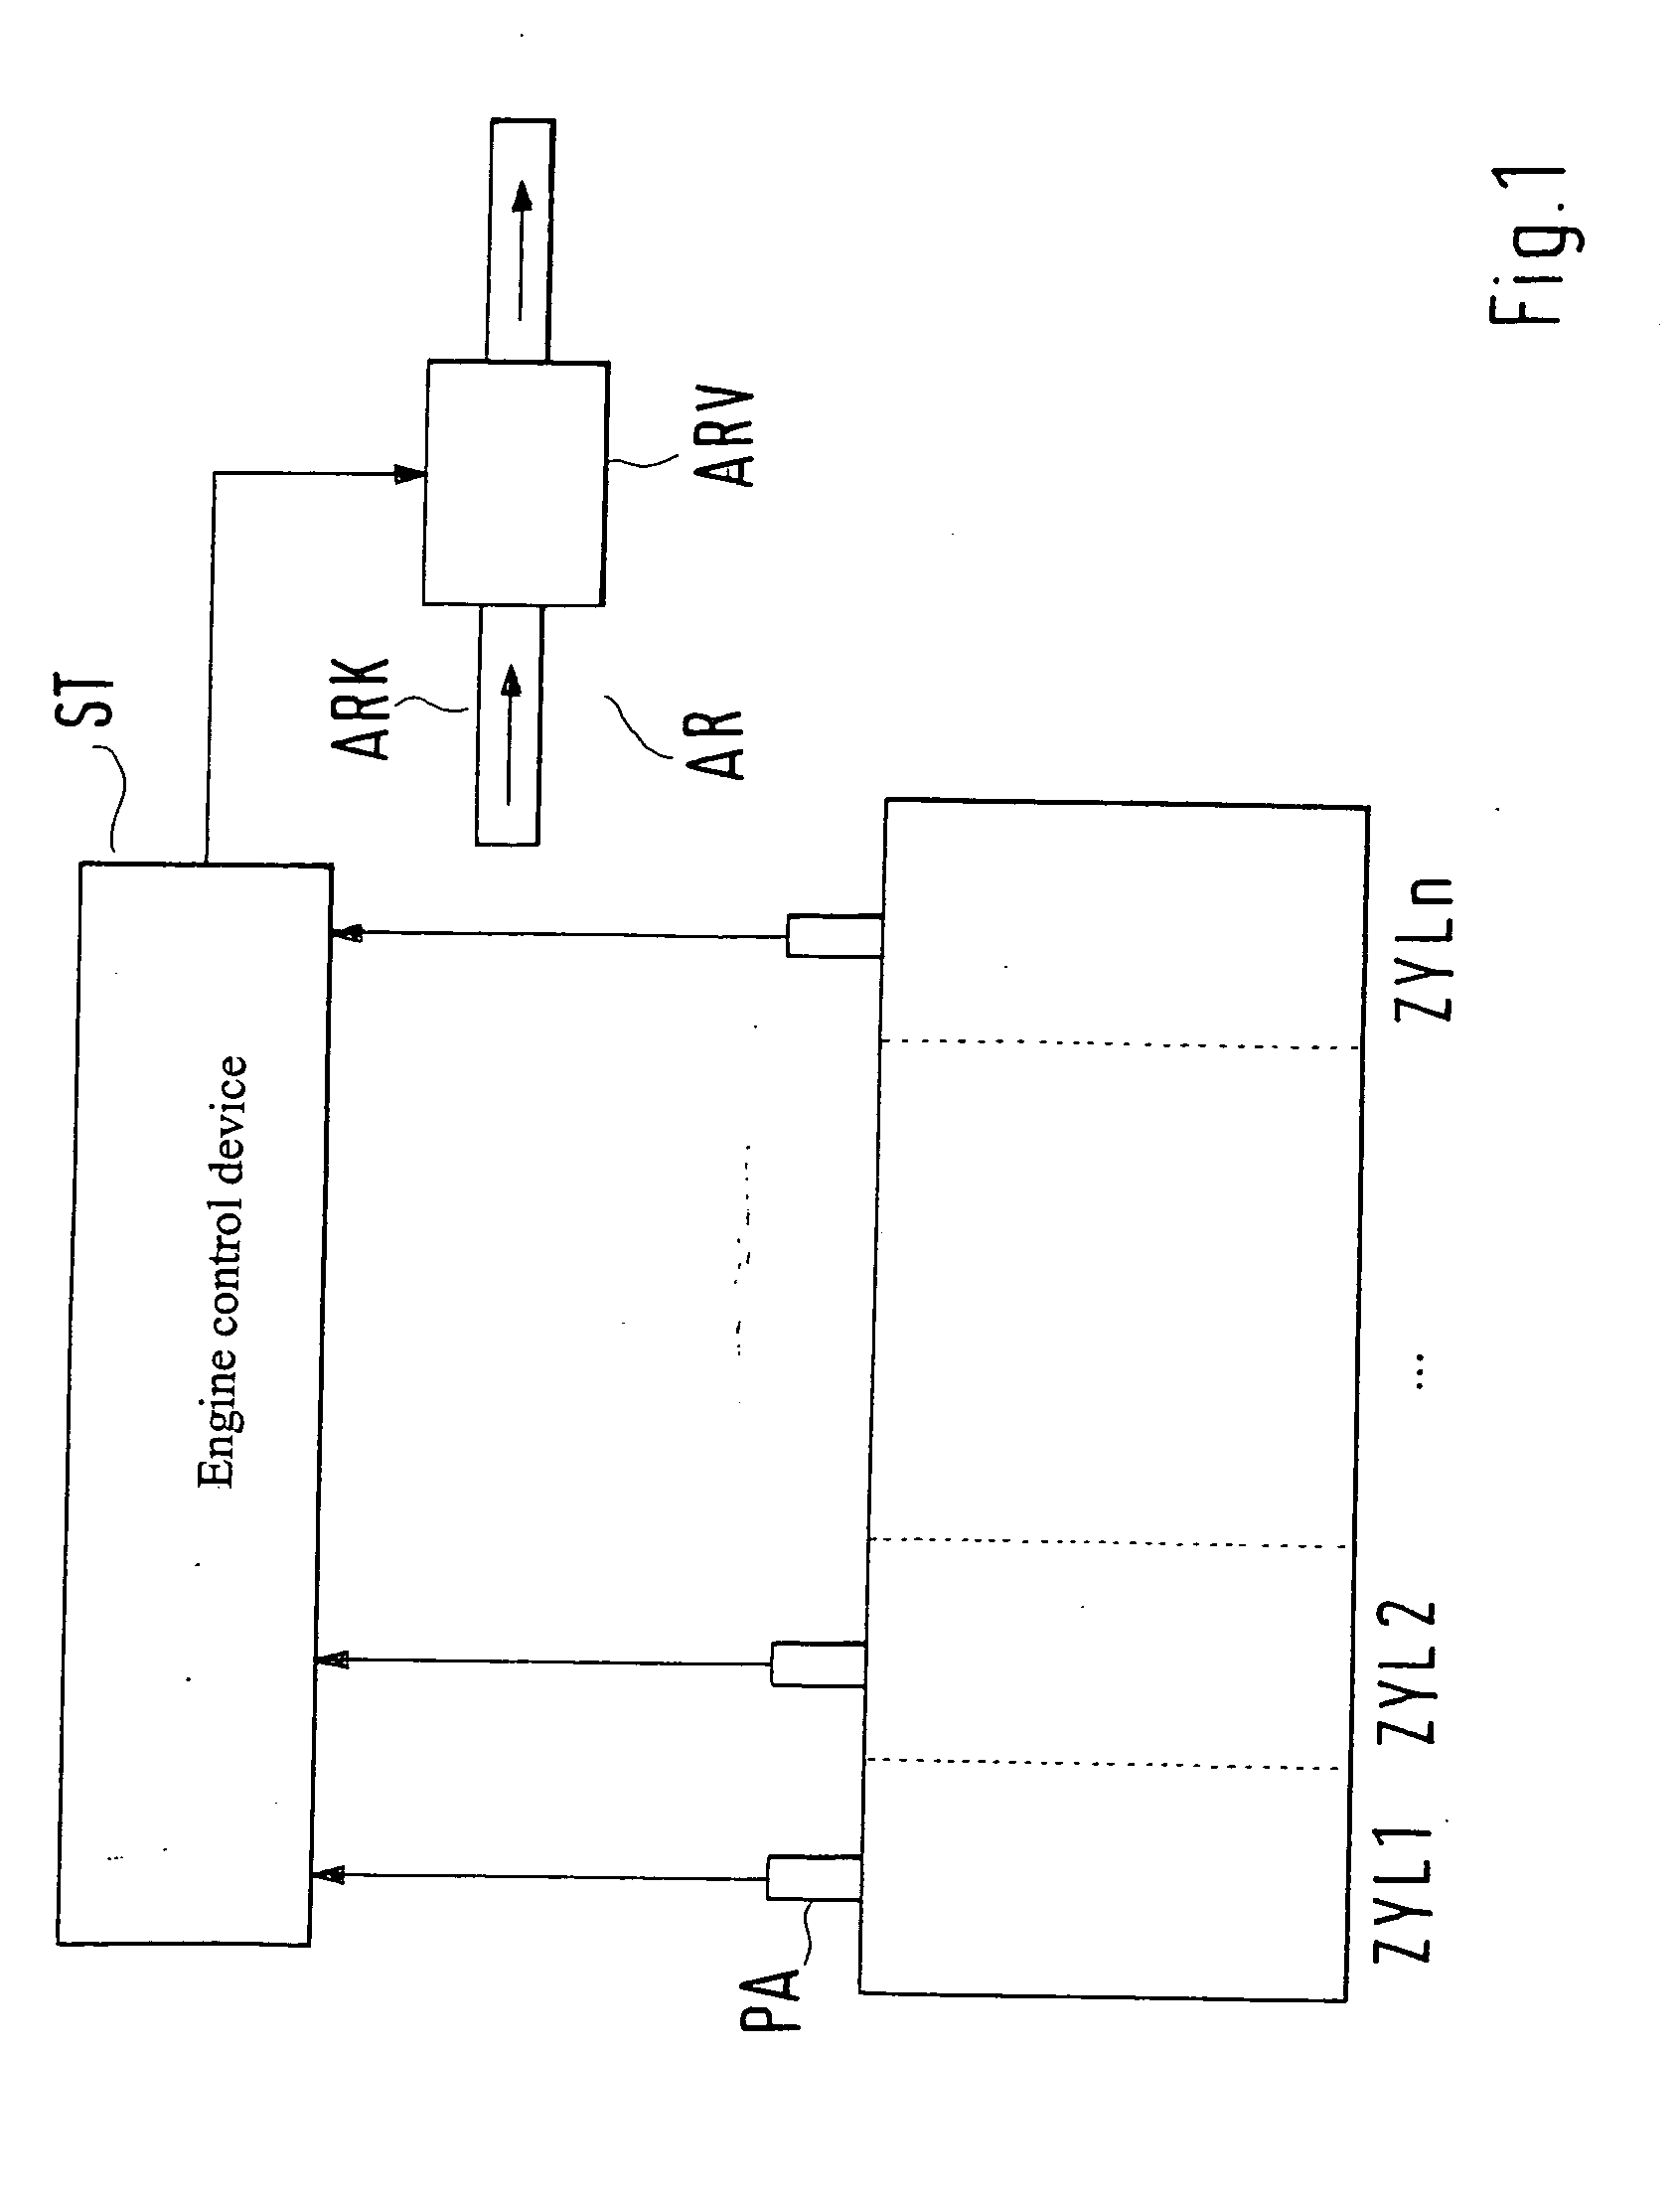 Method for Monitoring the Exhaust Gas Recirculation of an Internal Combustion Engine